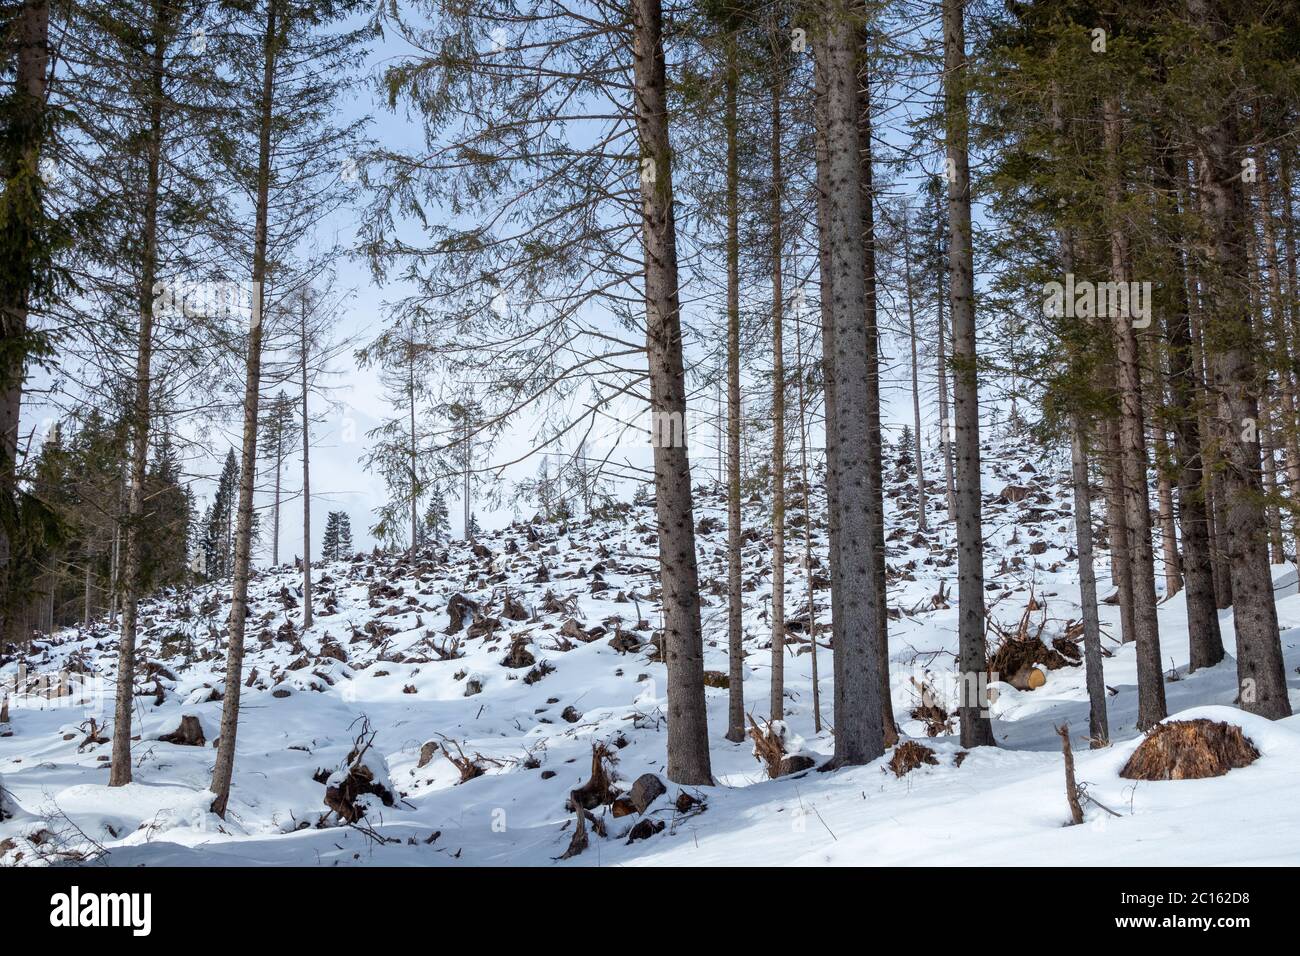 Coniferous forest of Paneveggio in winter season. Area affected by the Vaia storm which has torn many trees. Region Trentino. Italian Alps. Europe. Stock Photo